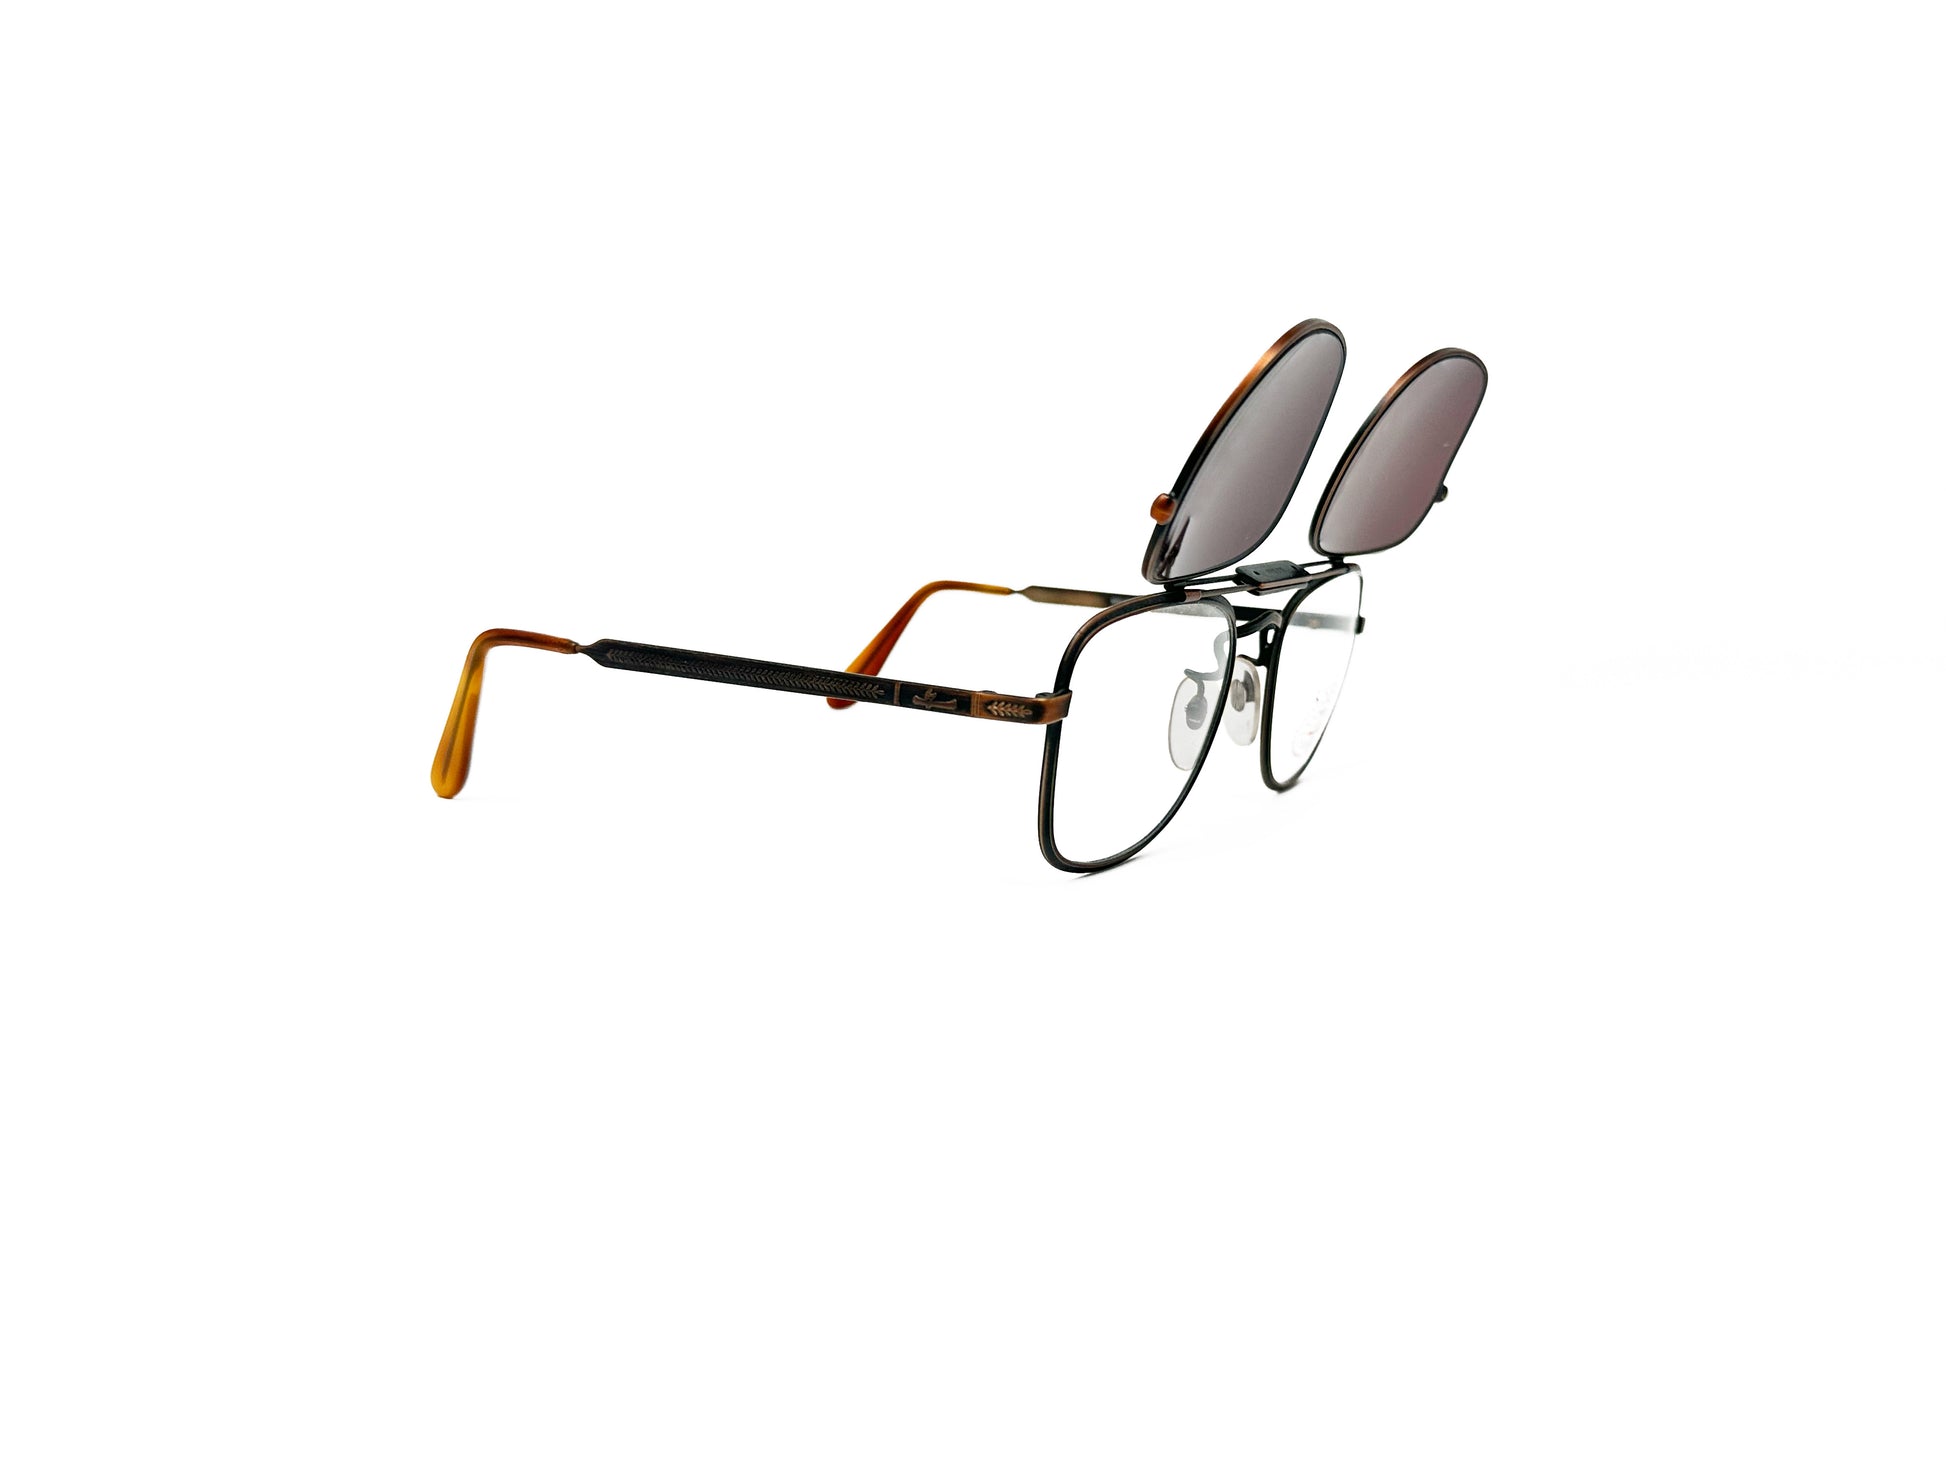 Sisley rounded-square flip-up sunglass with bar across top. Model: SL4. Color: 009 - Bronze. Side view. Shades flipped up.